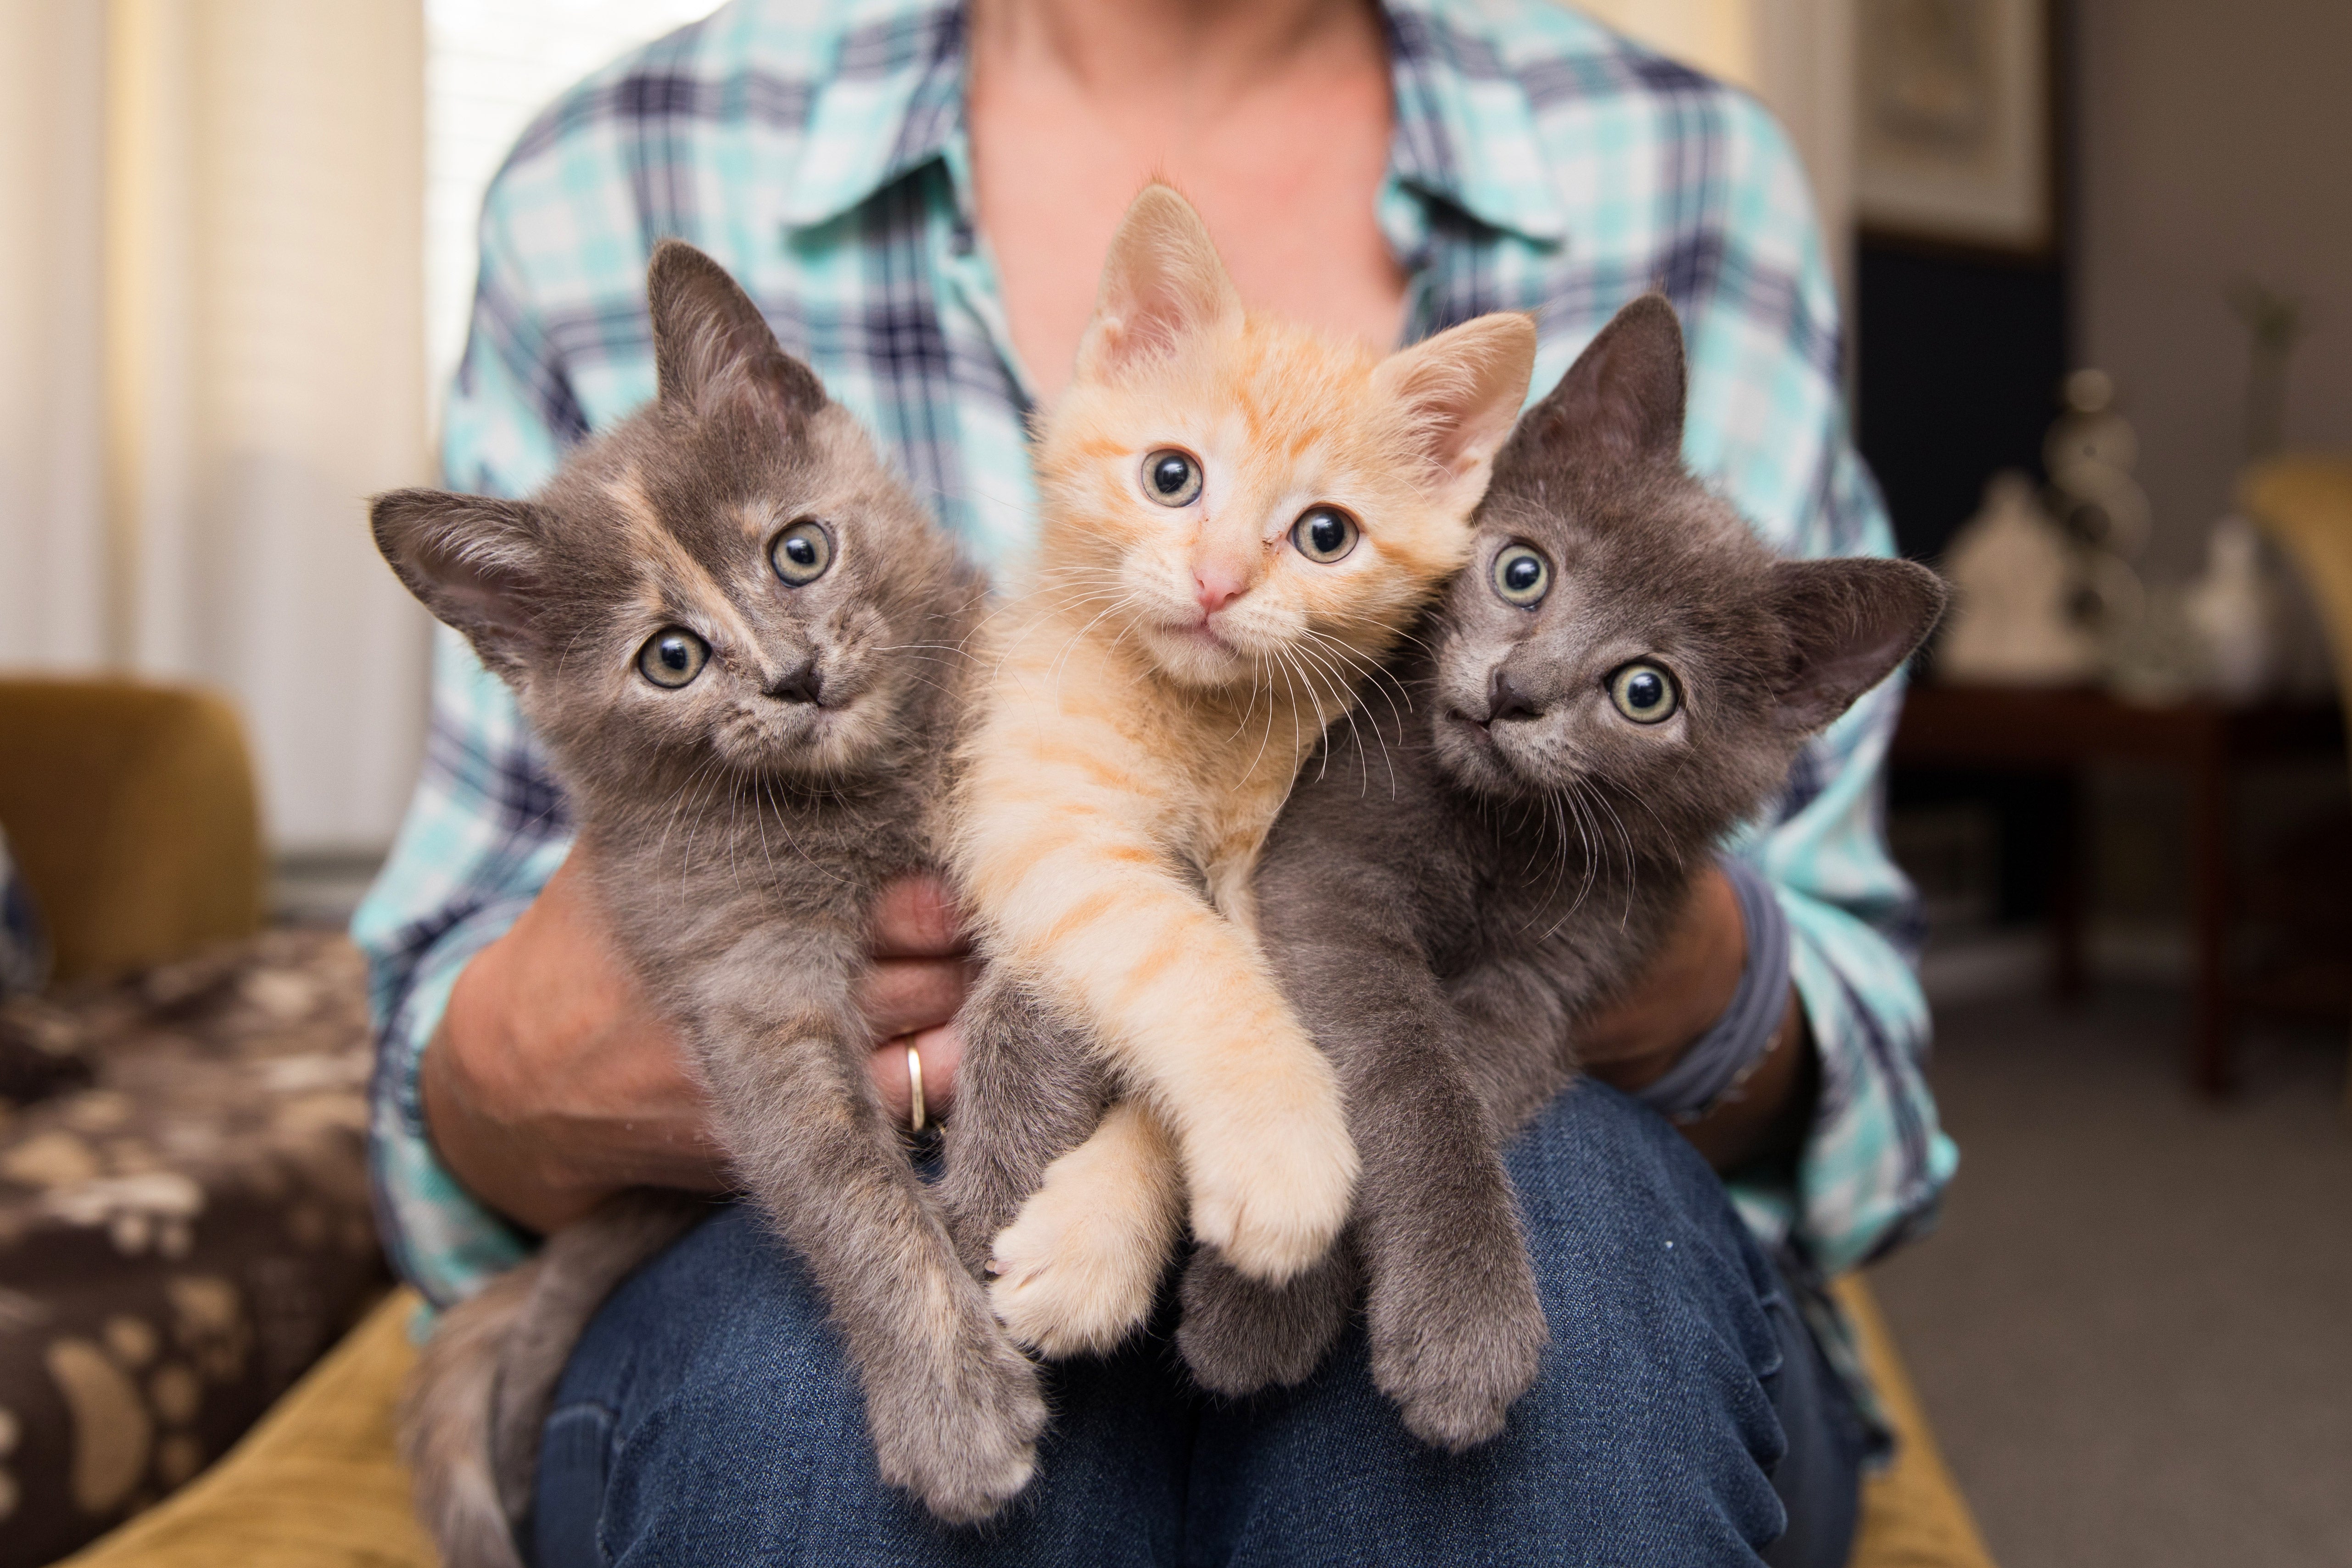 Person holding a trio of kittens, a dilute calico, orange tabby and gray